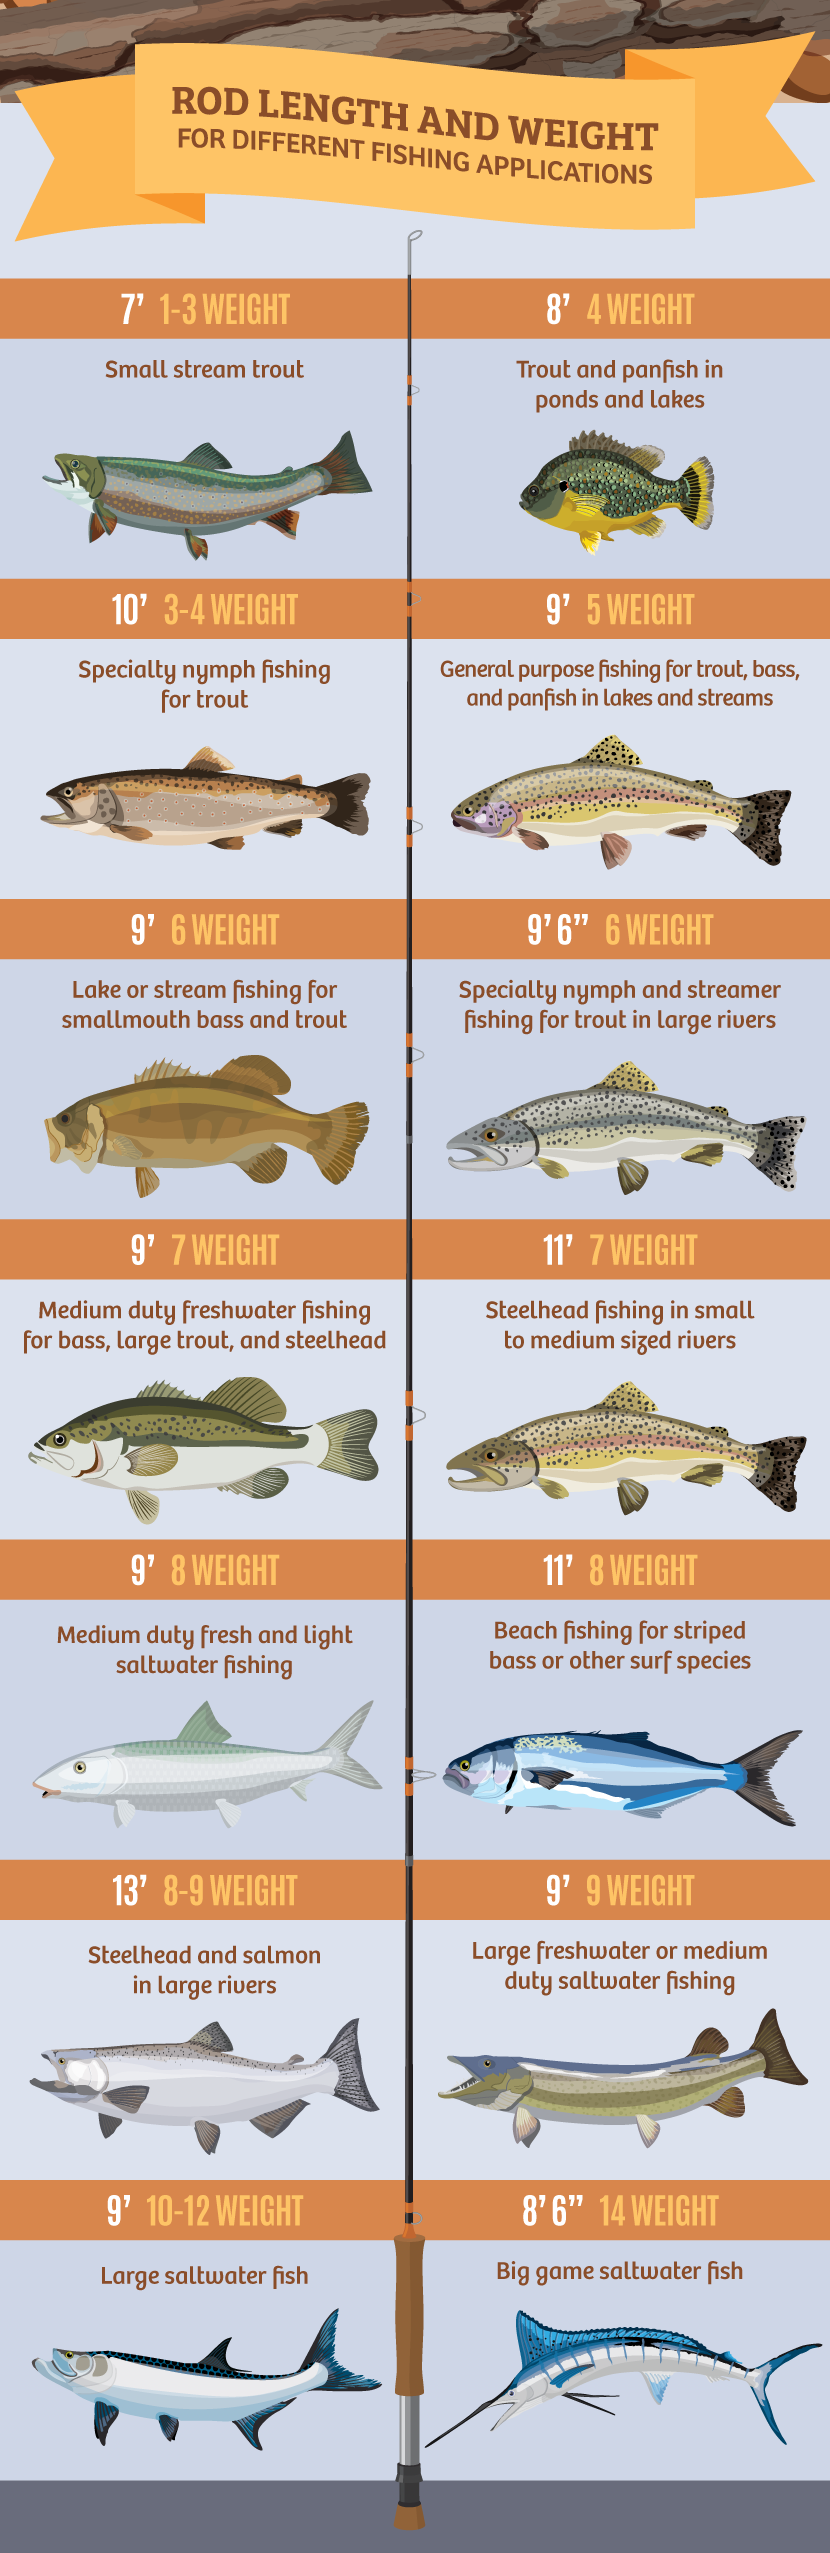 Rod Length and Weight by Fishing Application - Choosing the Right Fly Fishing Outfit